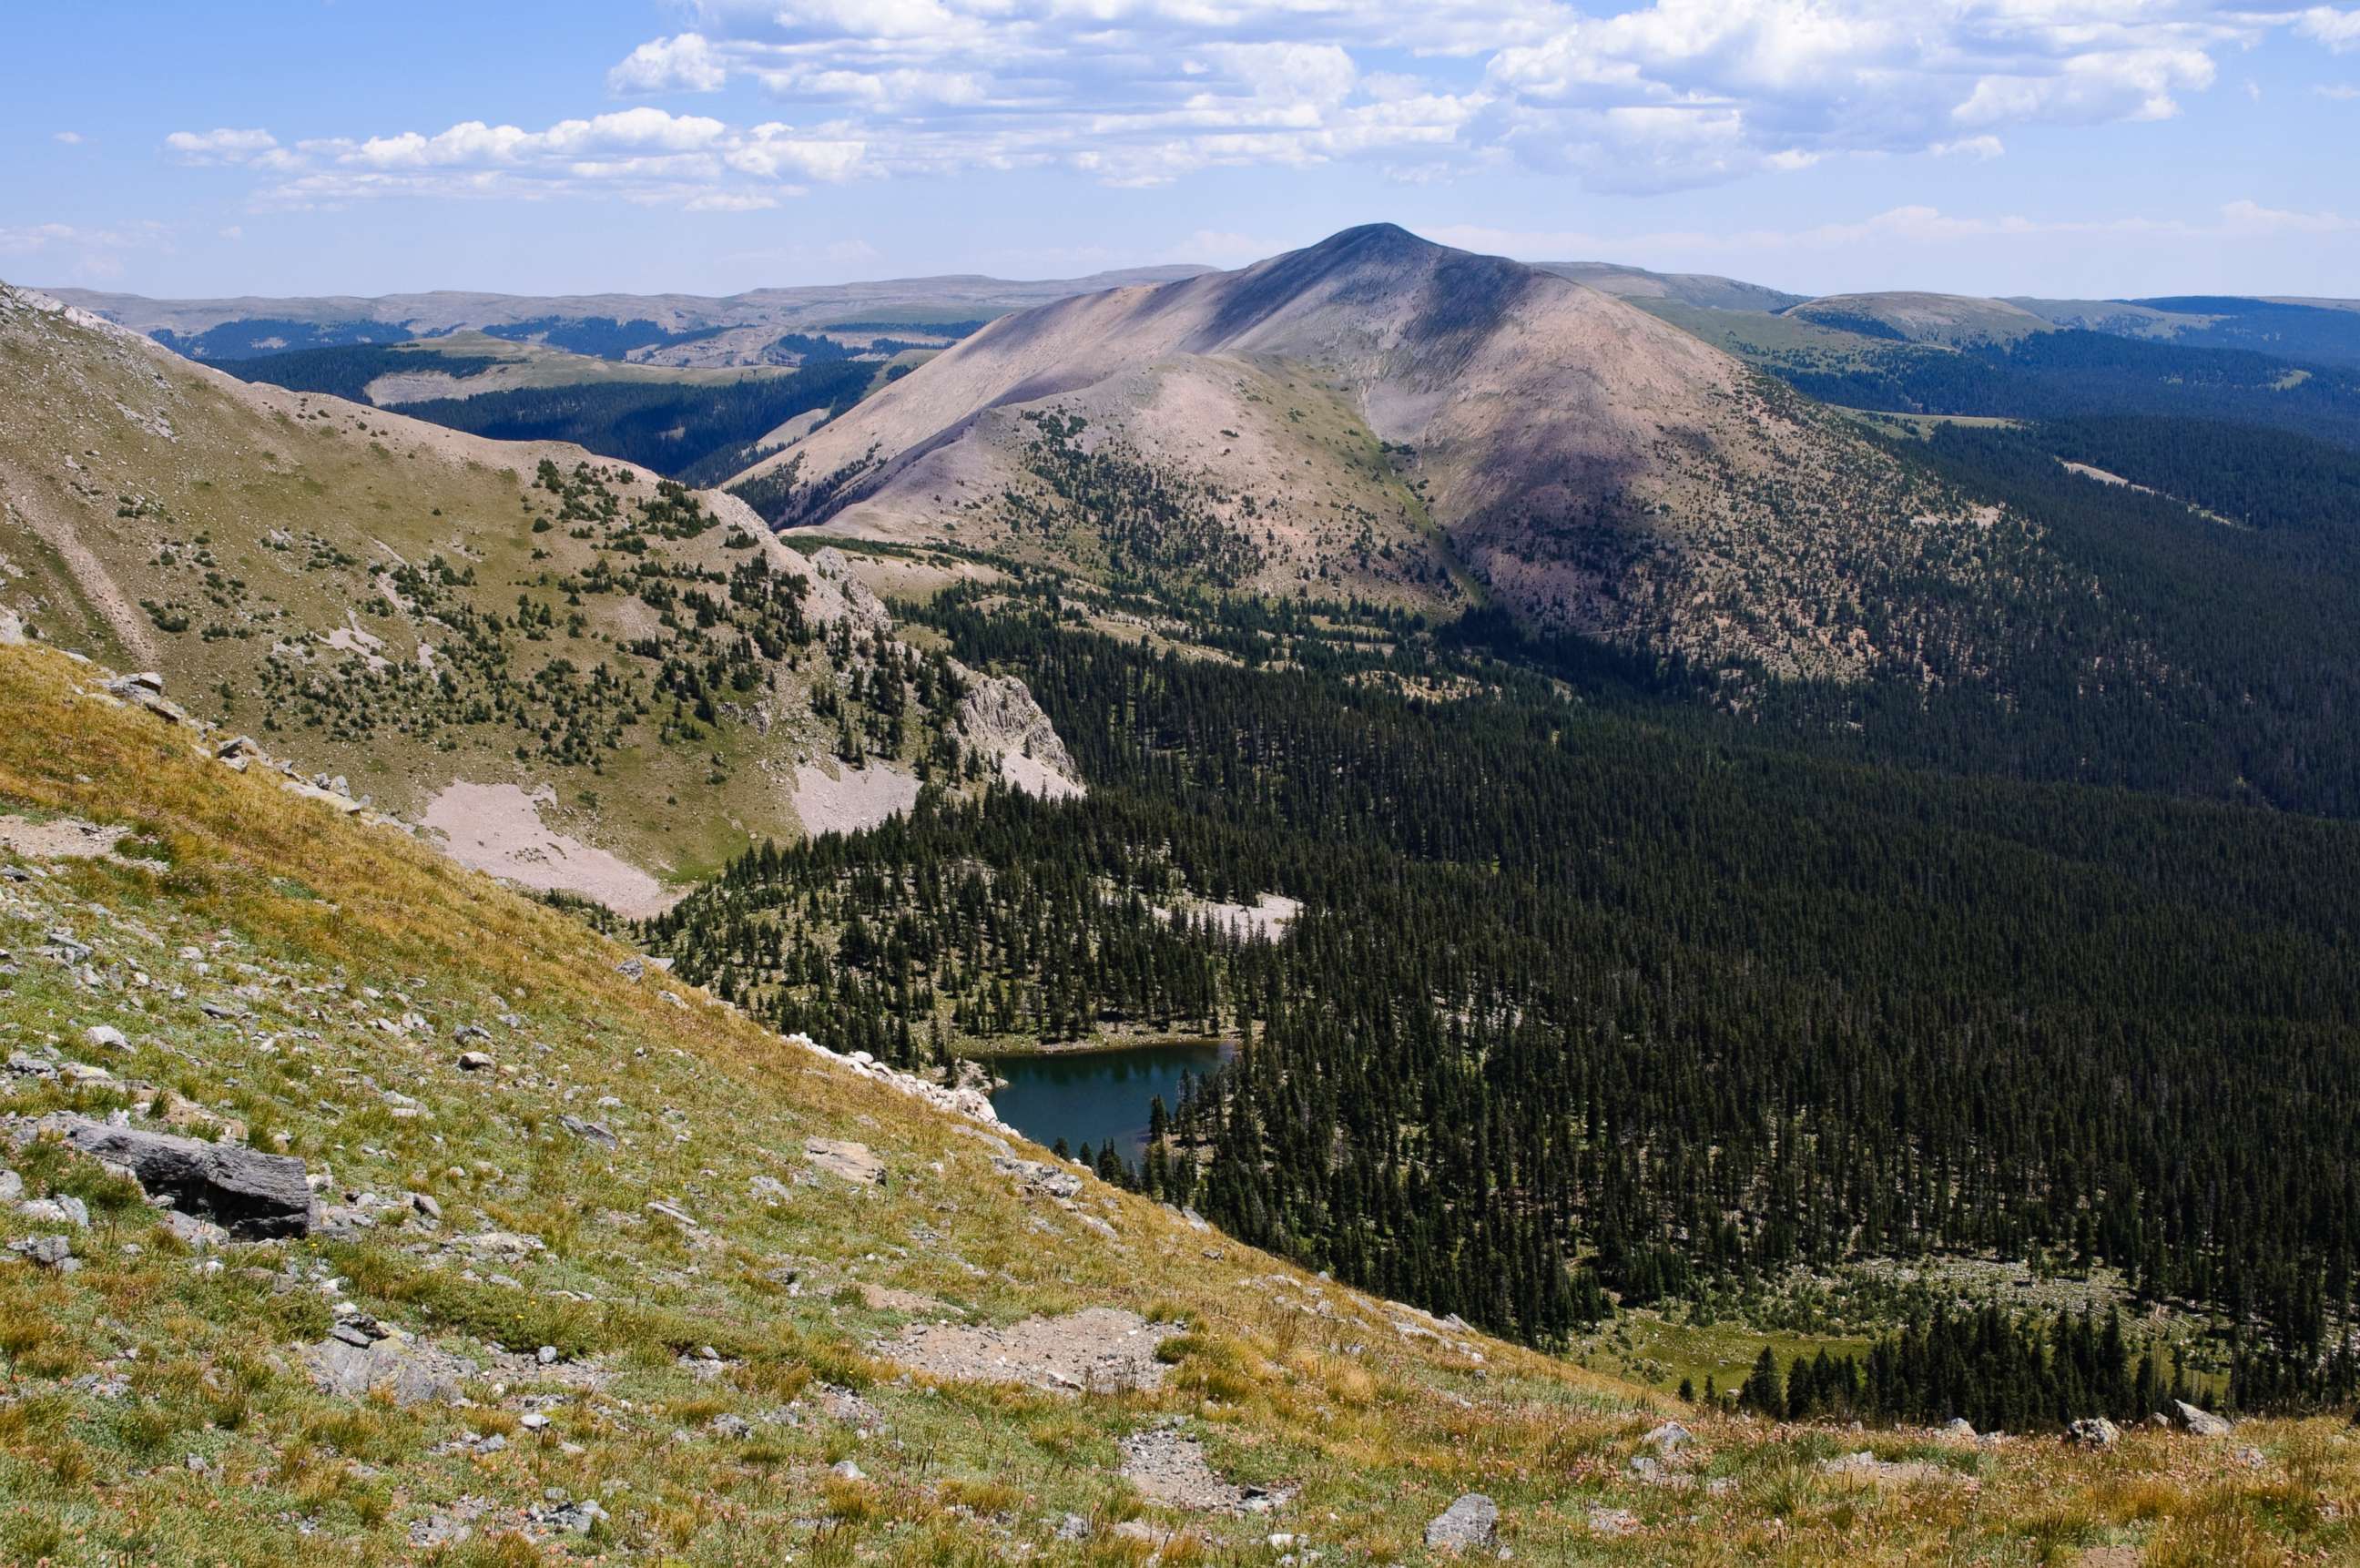 PHOTO: The Pecos Wilderness is seen in New Mexico.